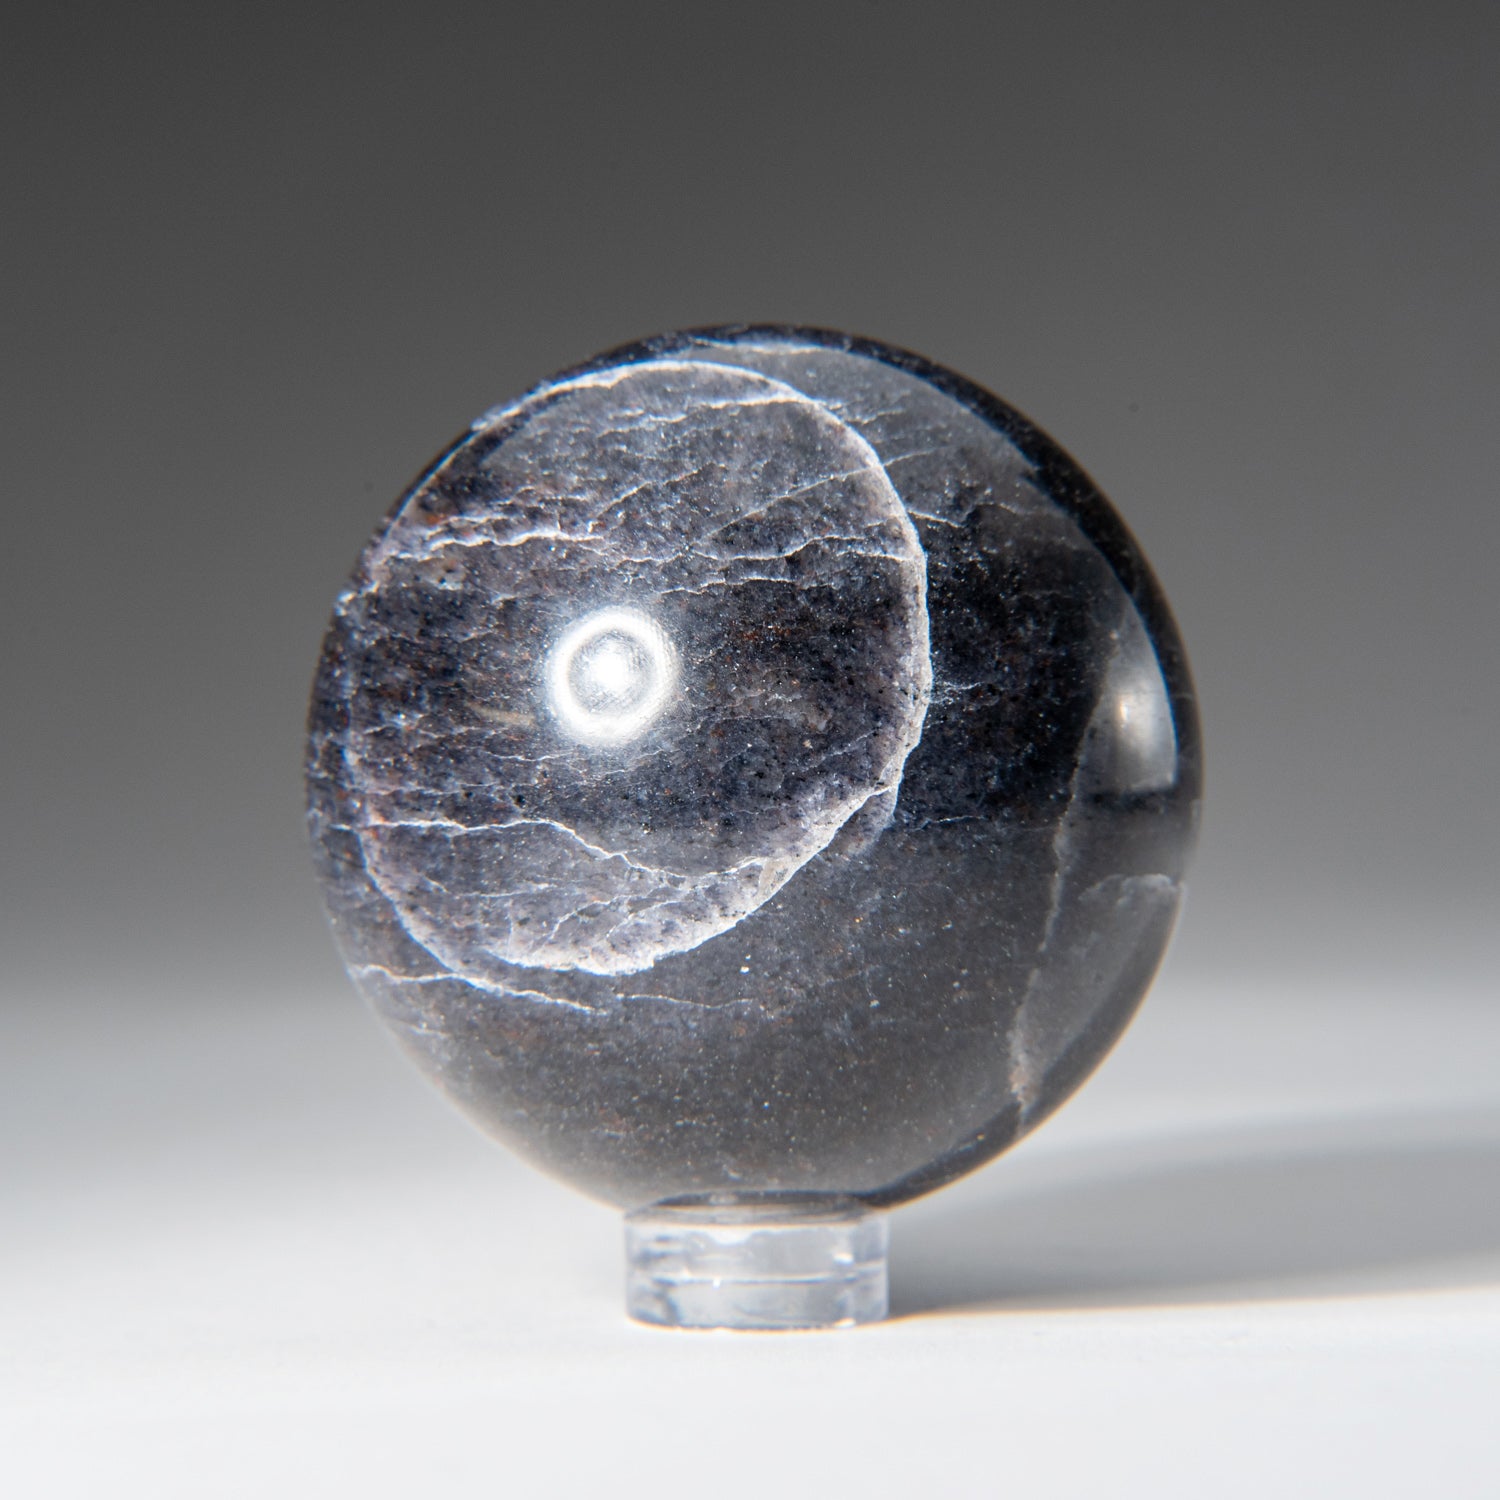 Genuine Polished Iolite Sphere (2") with Acrylic Display Stand